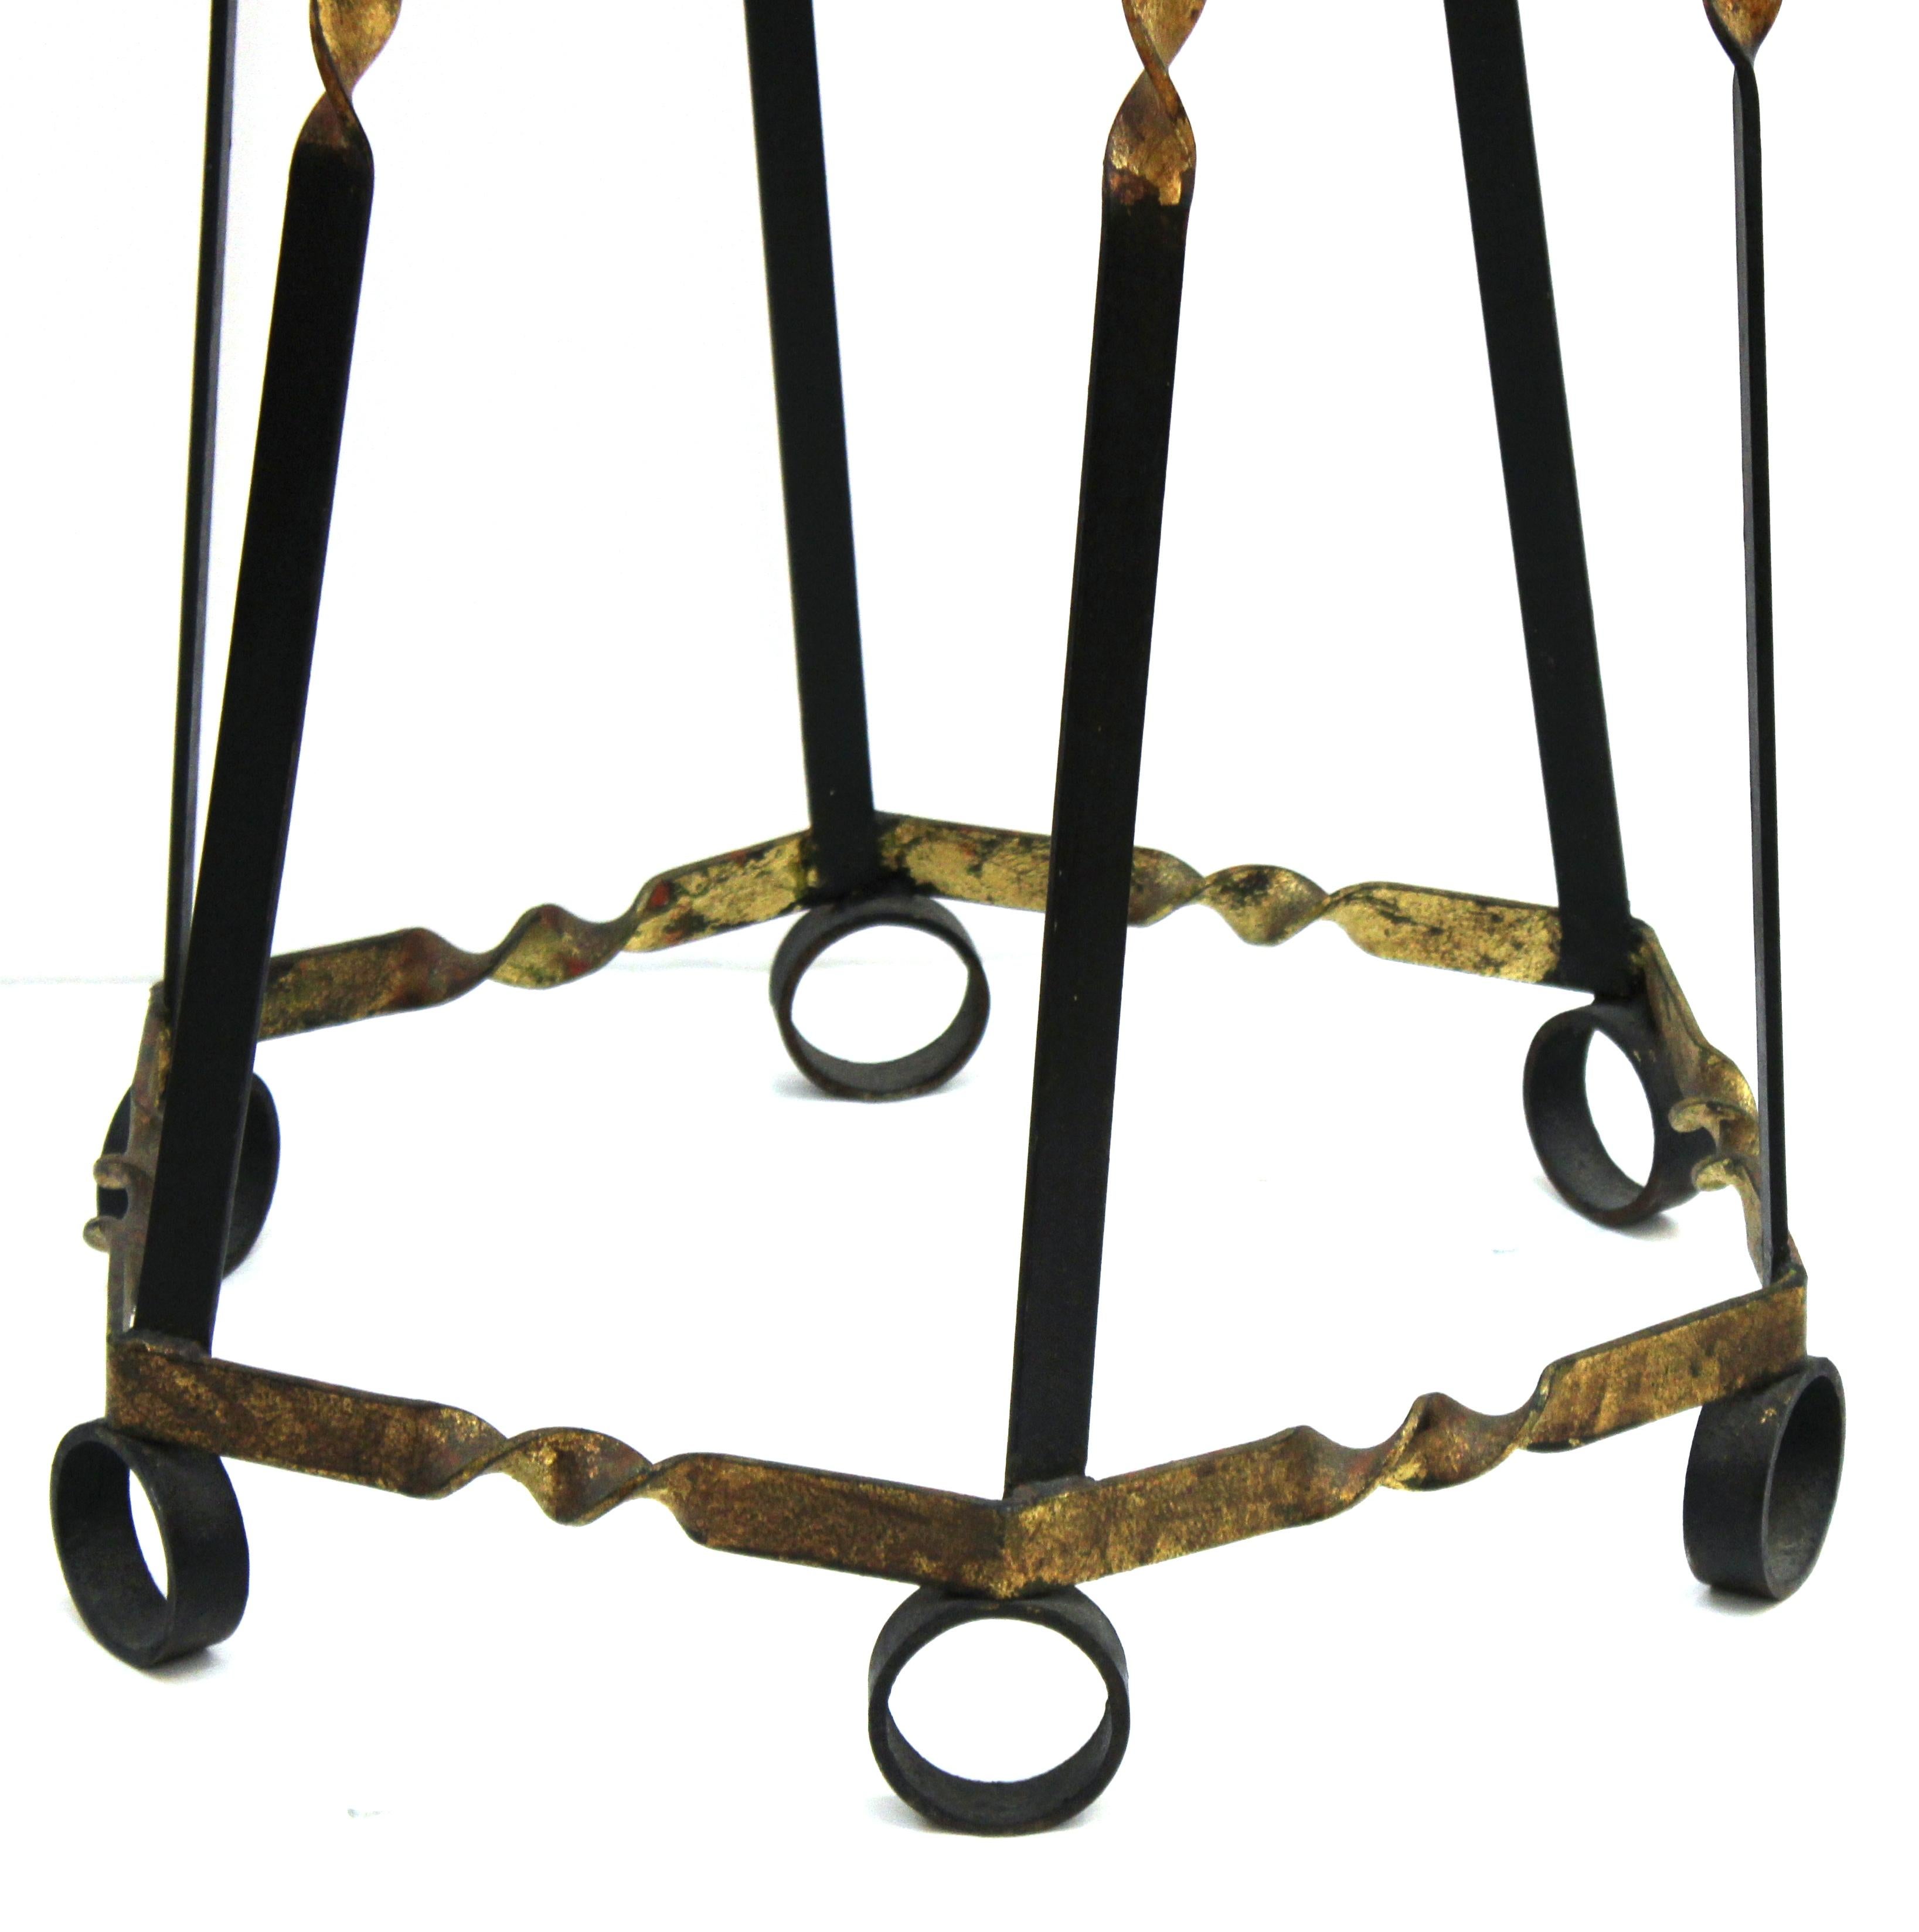 North American Midcentury Wrought Iron Coat Rack For Sale